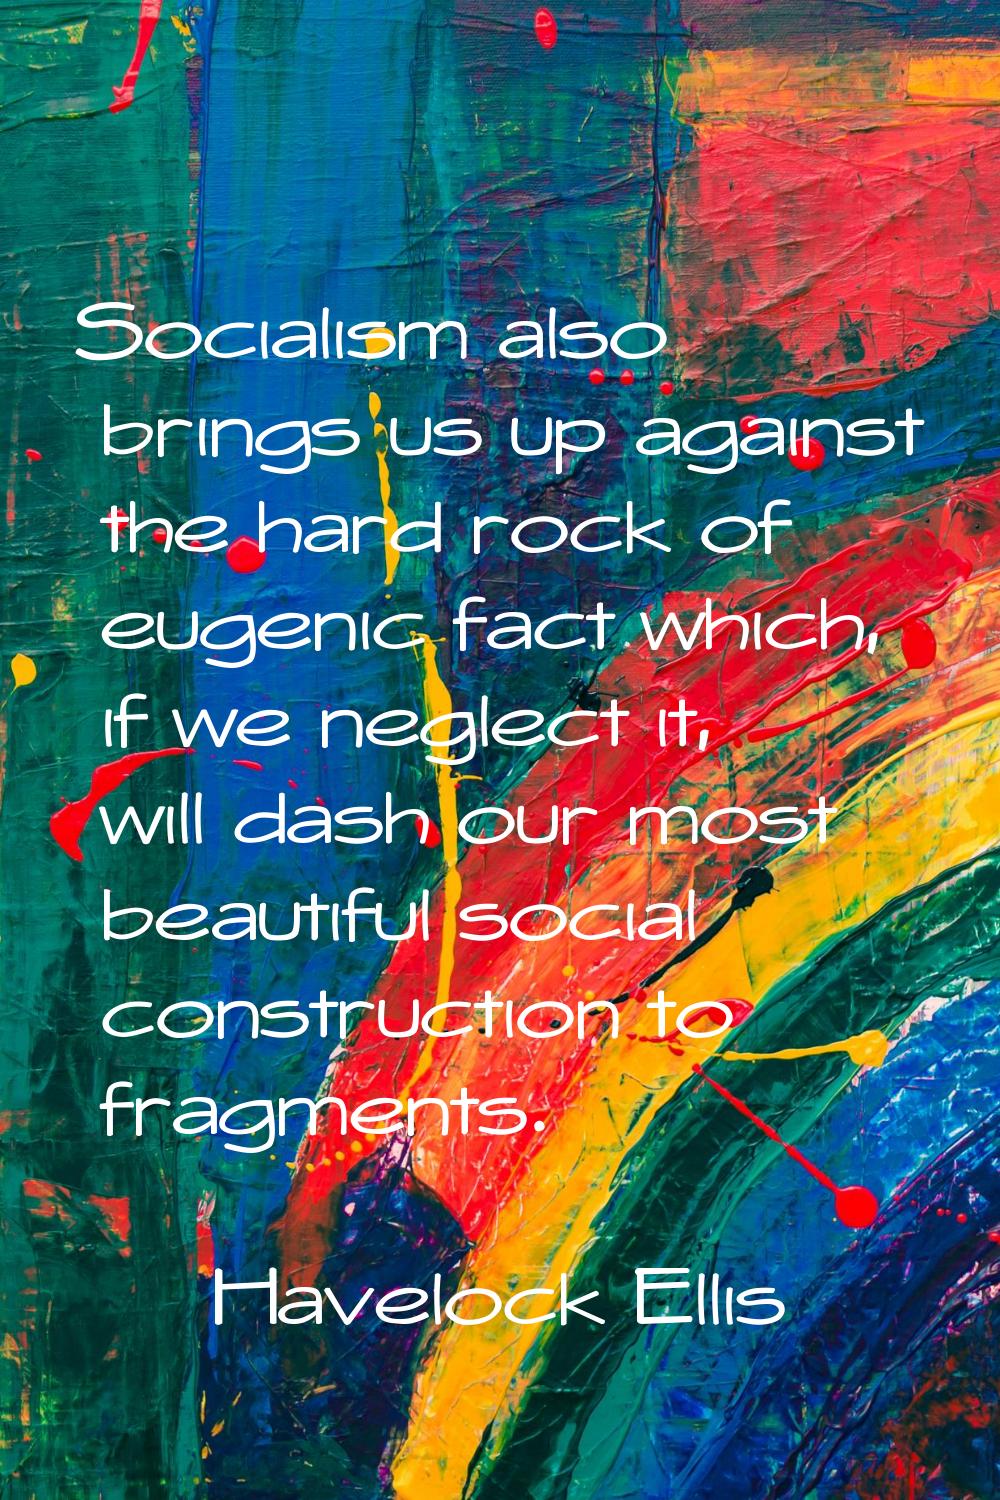 Socialism also brings us up against the hard rock of eugenic fact which, if we neglect it, will das